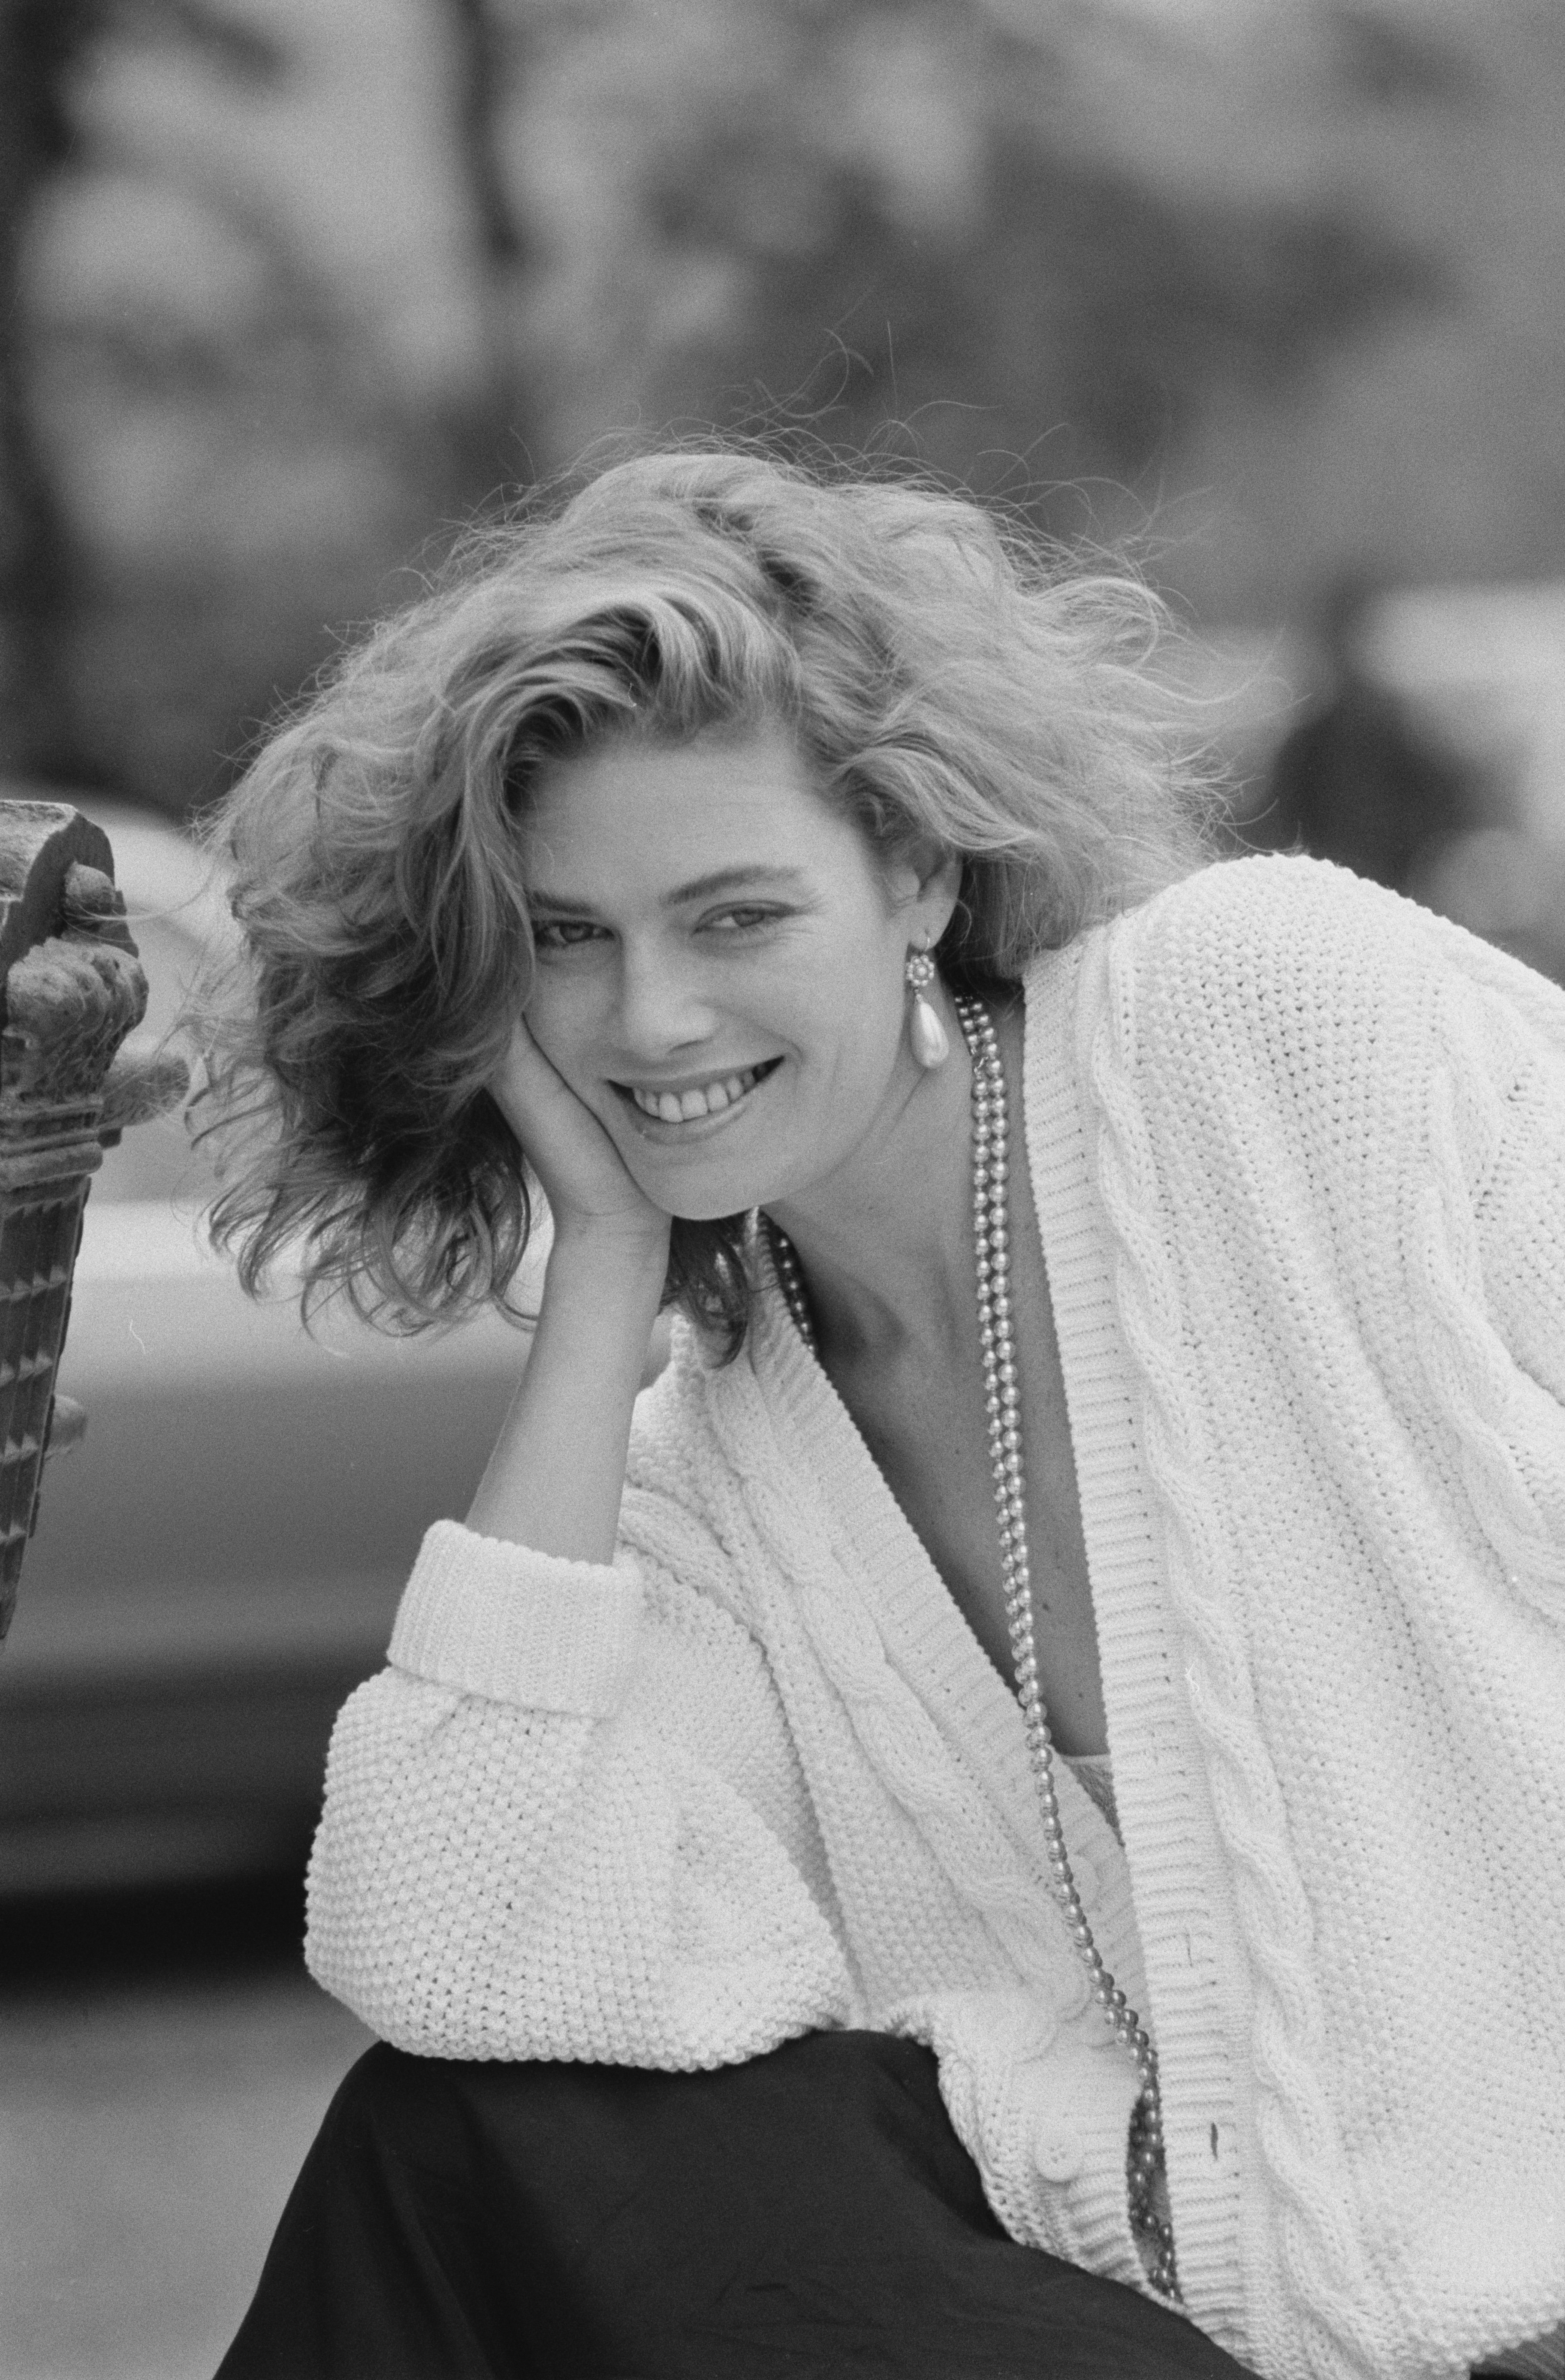 Photo of Kelly McGillis on May 15, 1985 in London | Source: Getty Images